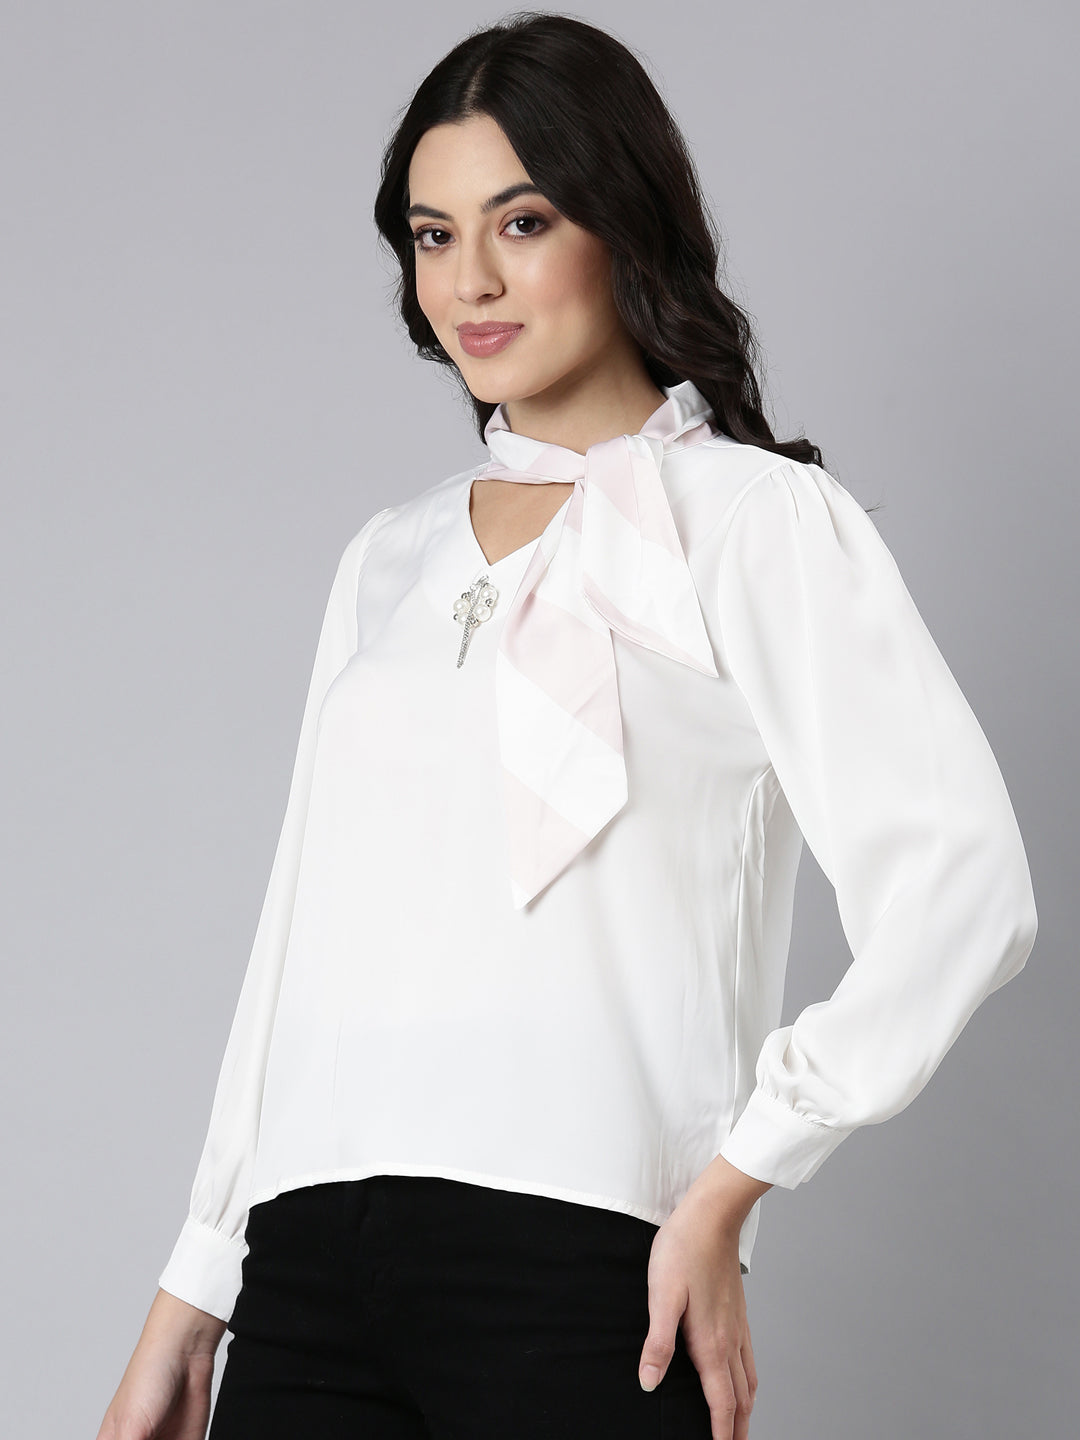 Women Solid Shirt Style Off White Top